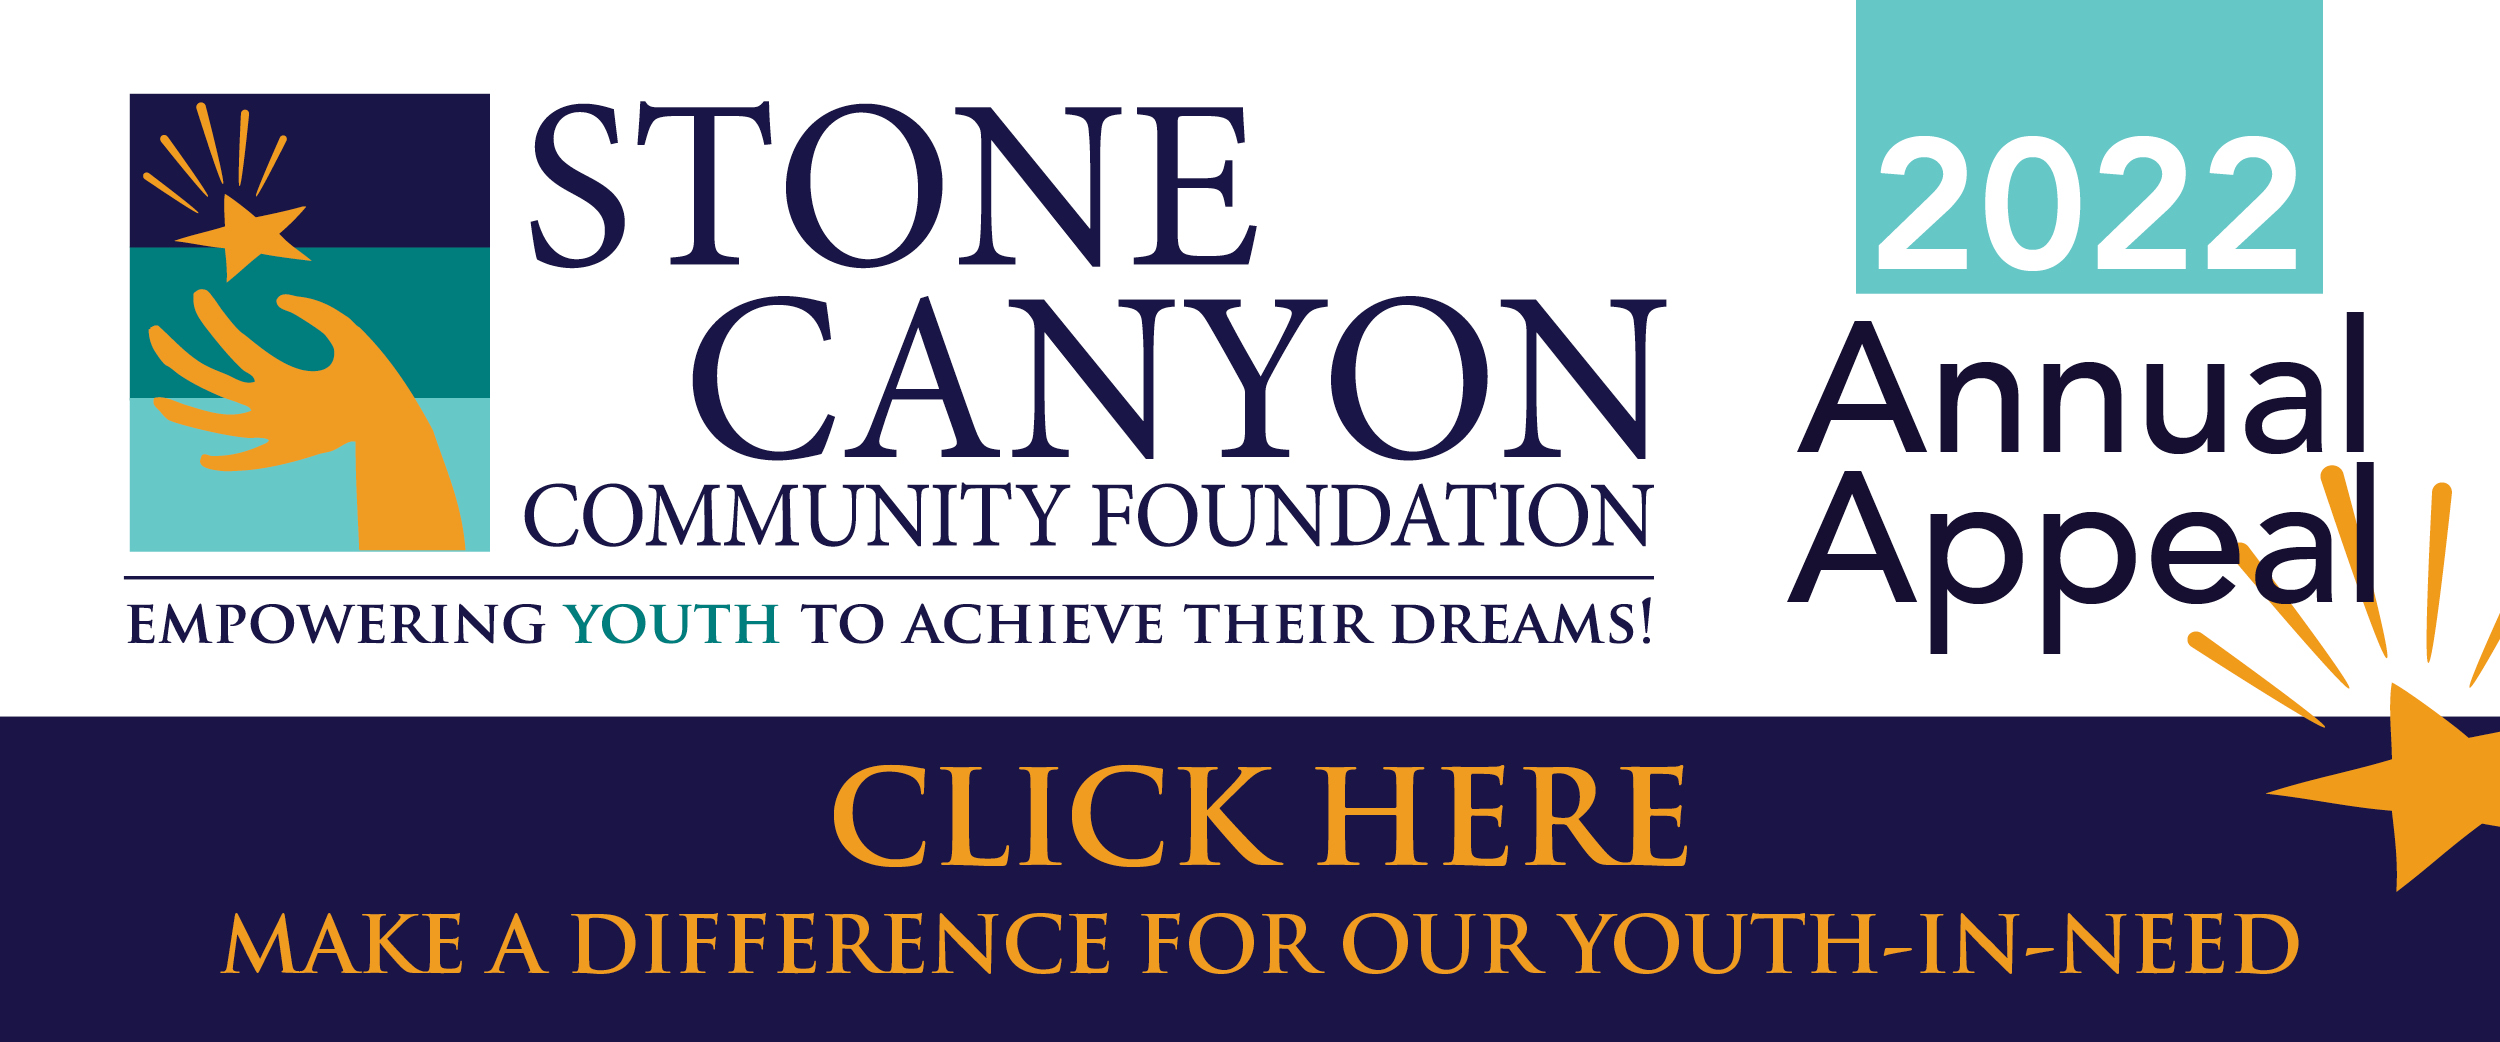 Stone Canyon Community Foundation - Annual Appeal 2022